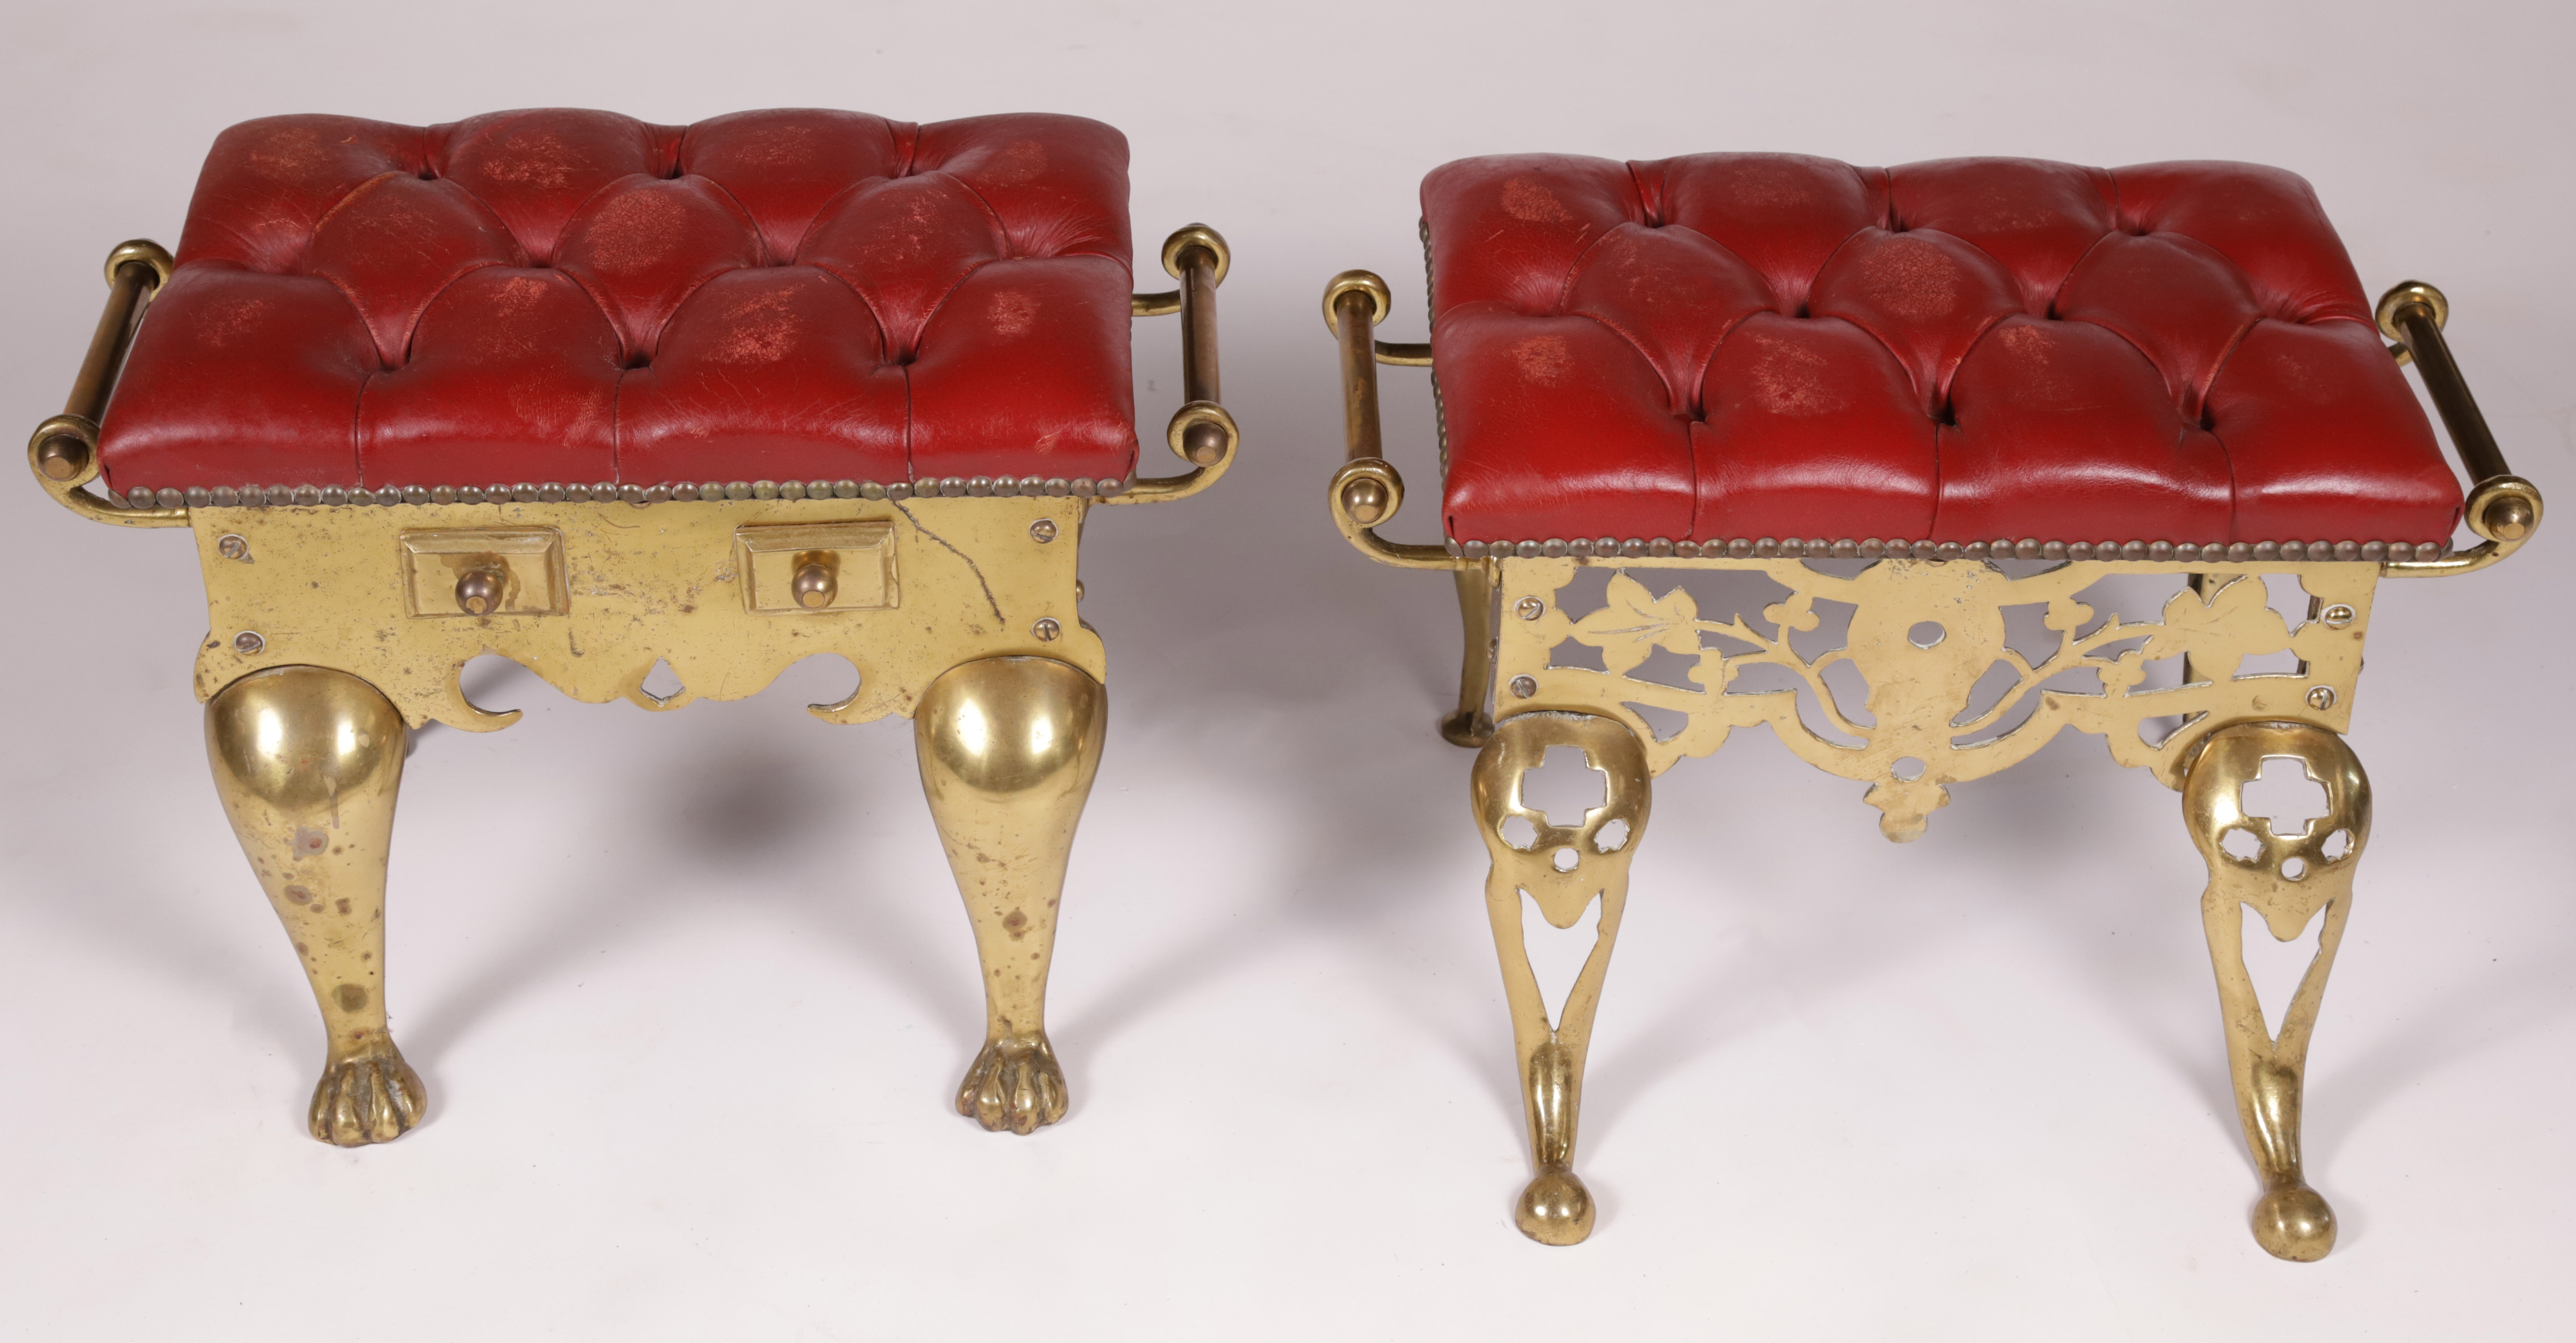 Pair of 19th Century Brass and Red Leather Tufted Foot Rests